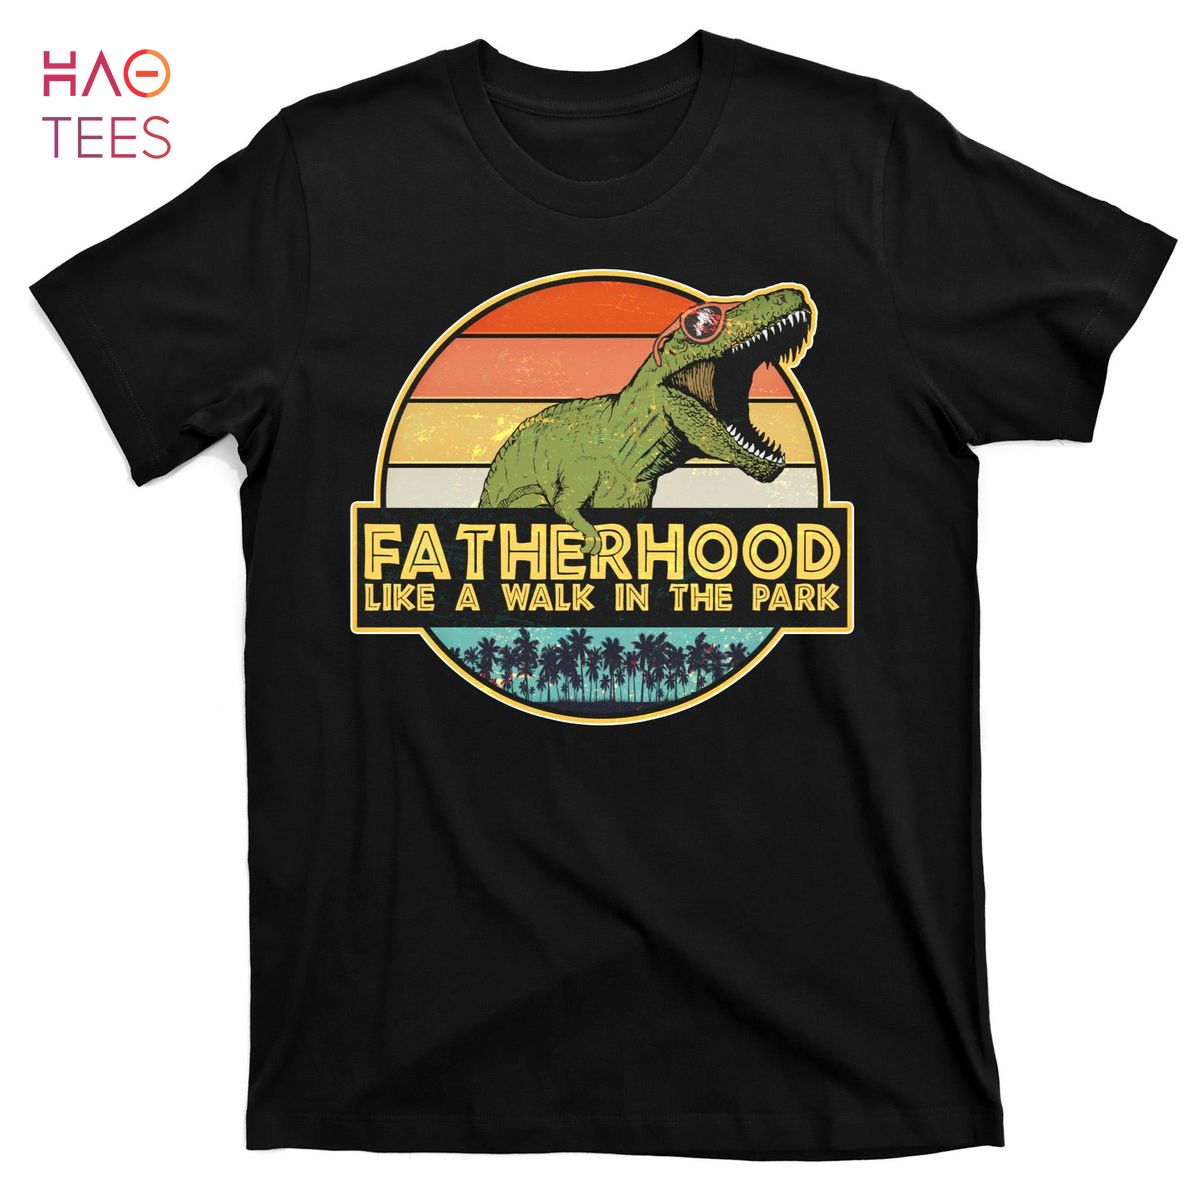 HOT Fatherhood Like a Walk In The Park Fathers Day T-Shirts